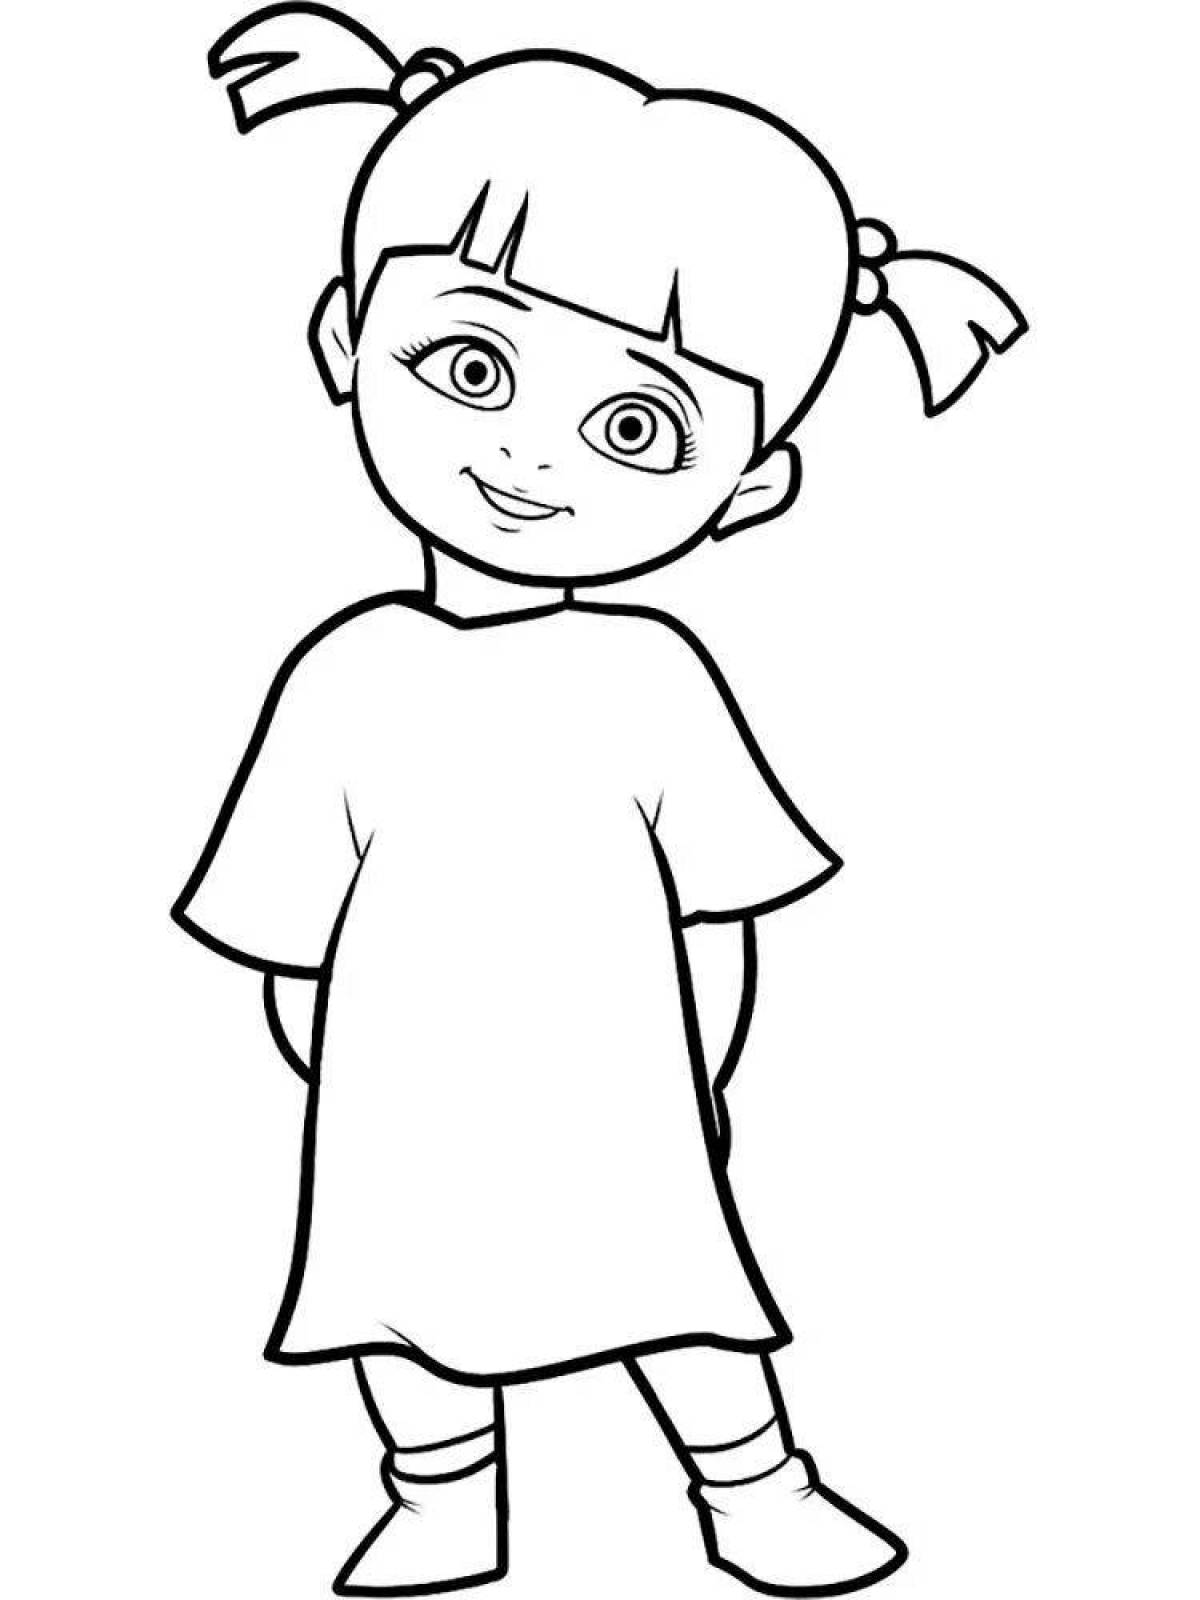 Awesome man and girl coloring pages